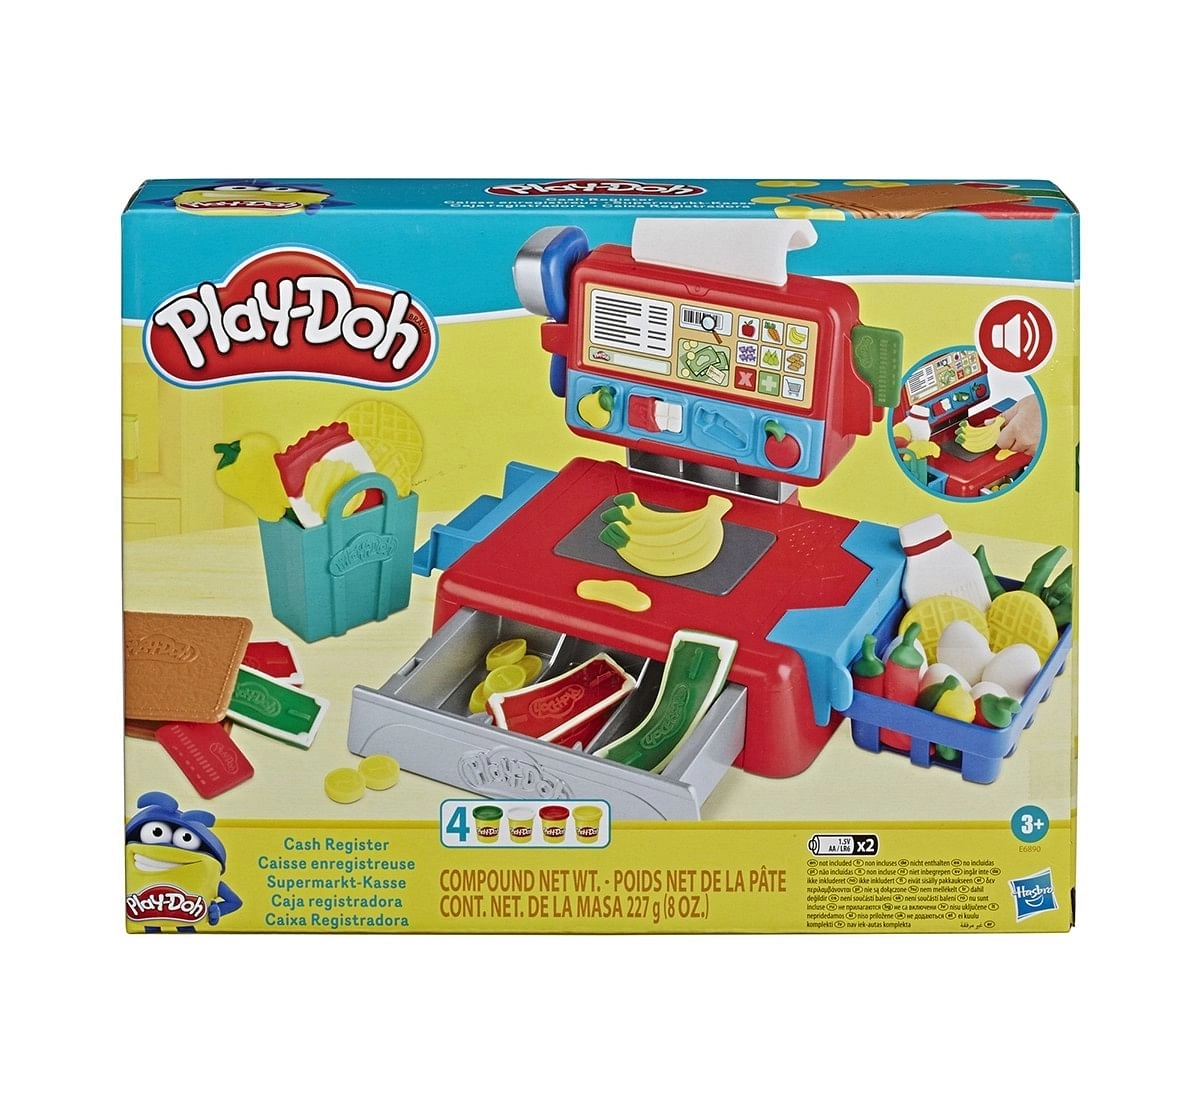 Play-Doh Cash Register Toy for Kids 3 Years and Up with Fun Sounds, Play Food Accessories, and 4 Non-Toxic Play-Doh Colors   Clay & Dough for Kids age 3Y+ 